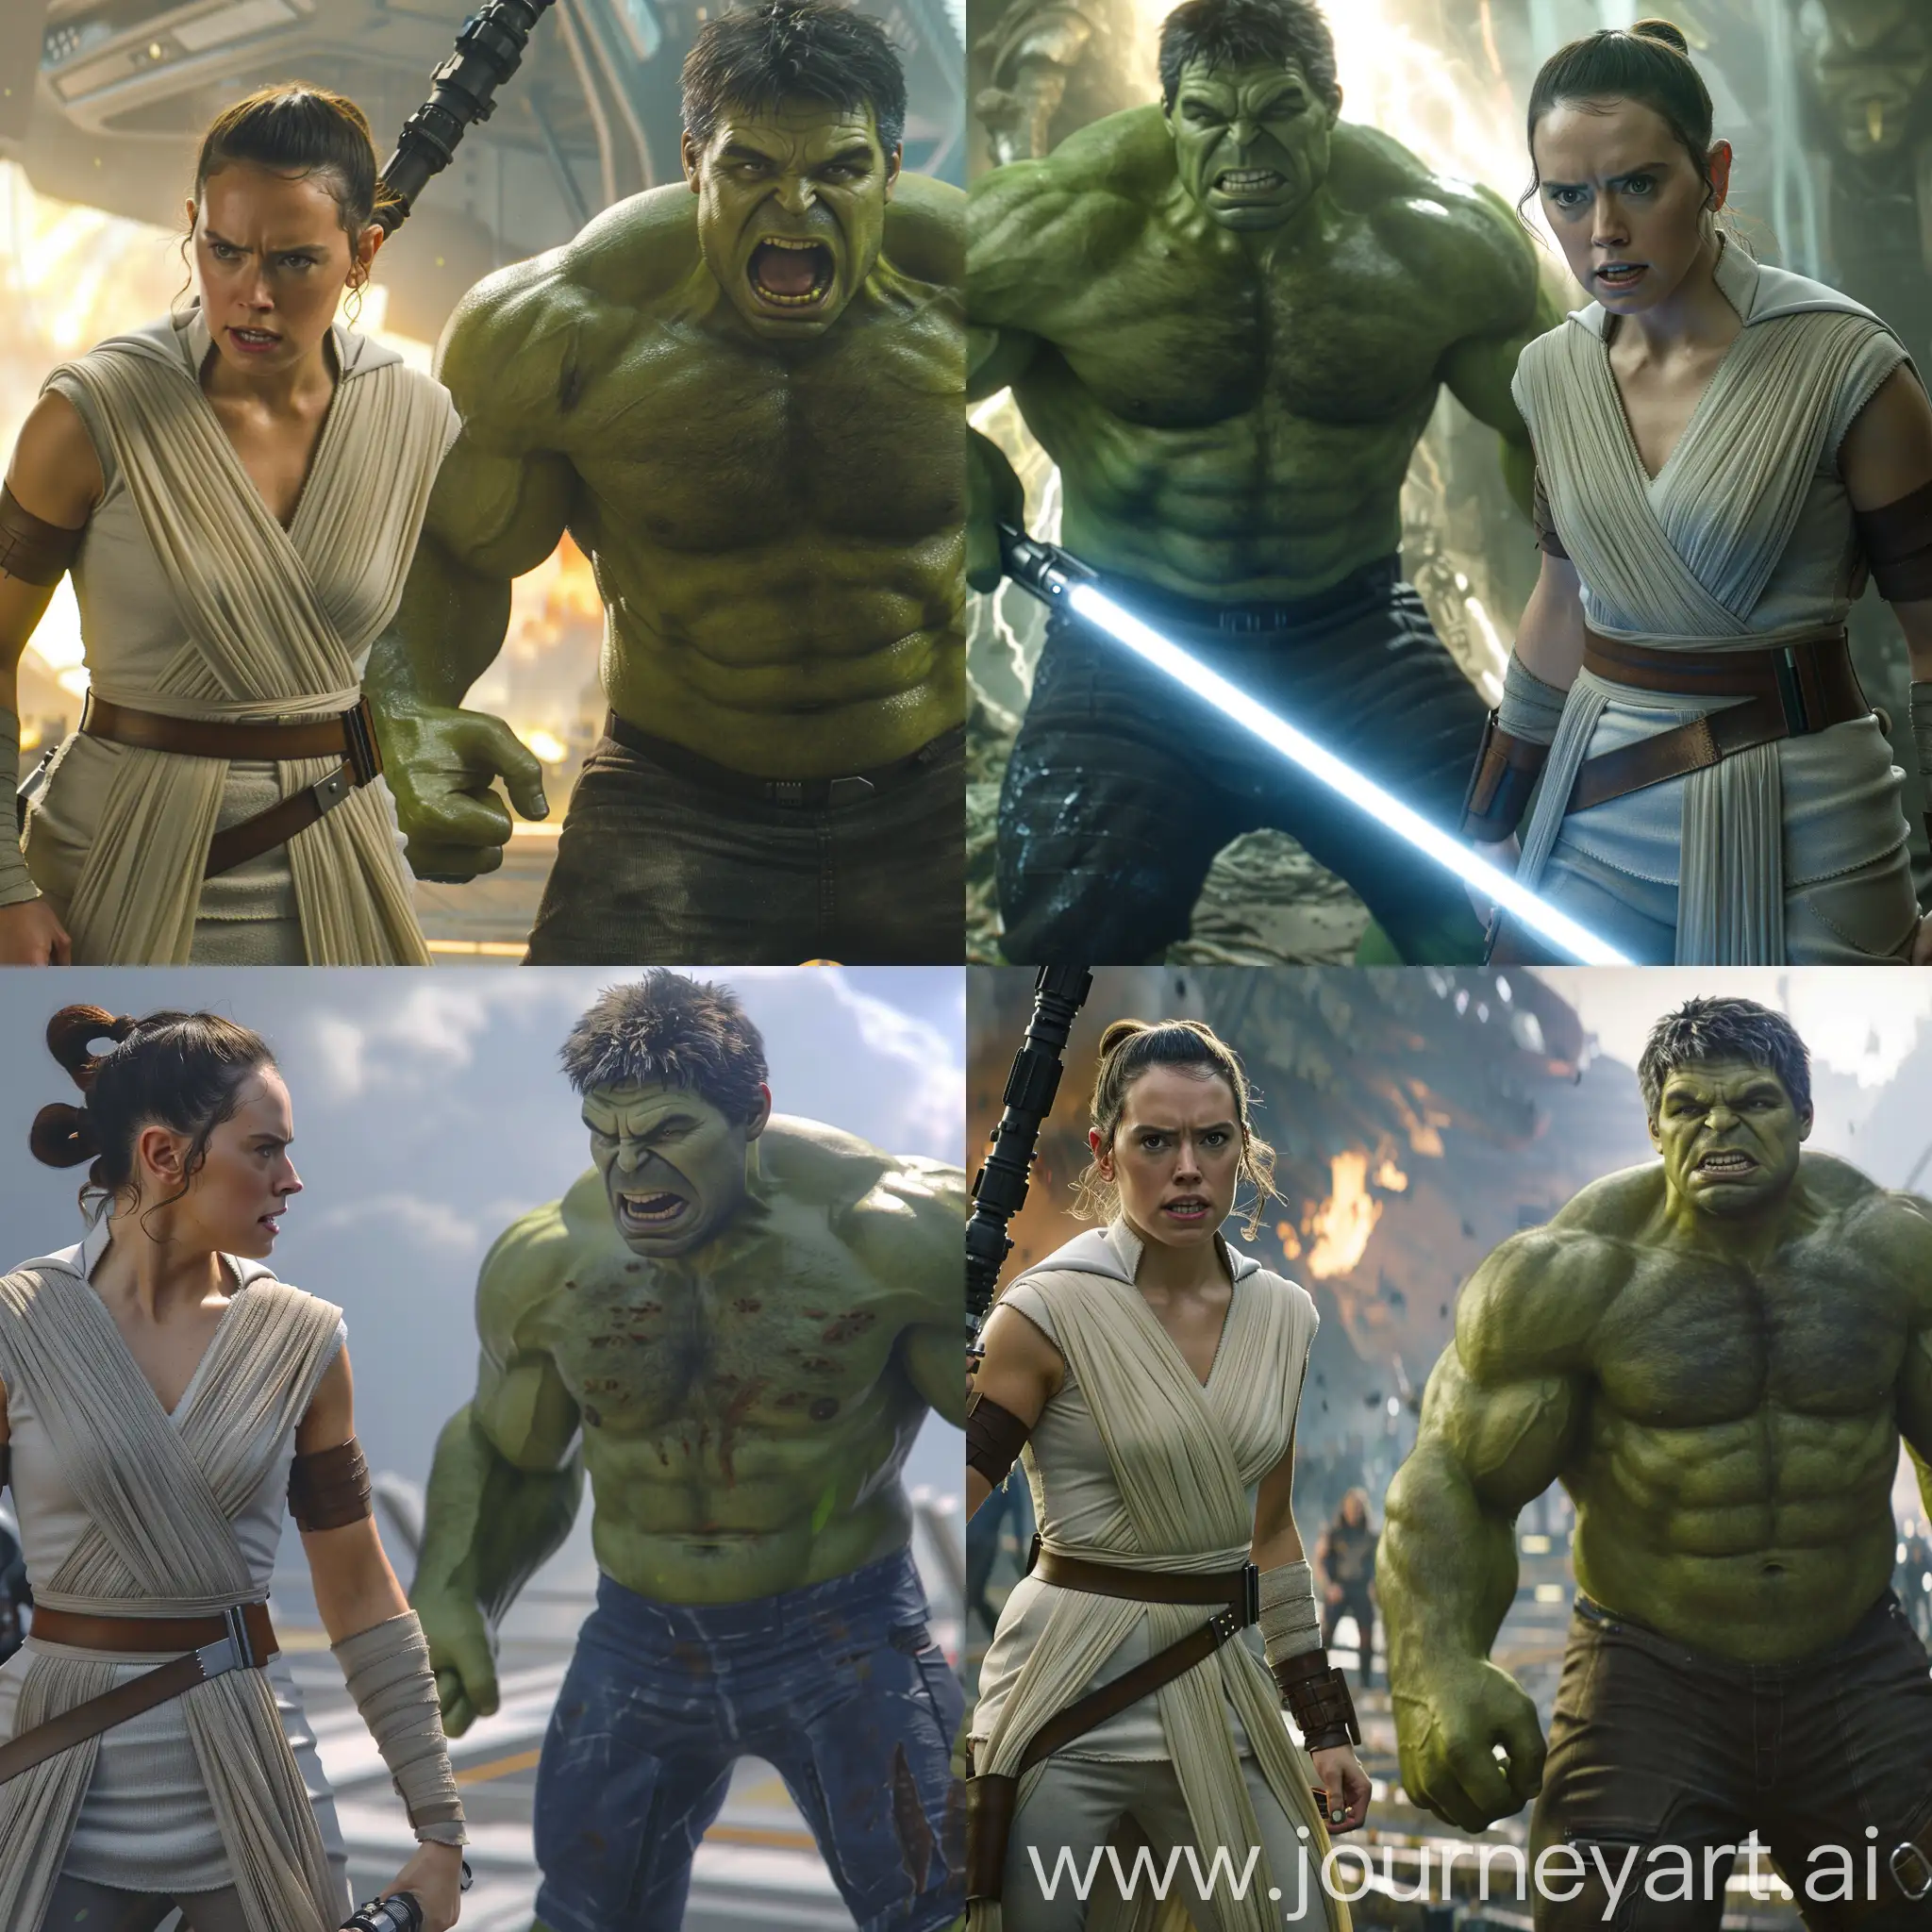 Rey-Skywalker-and-Hulk-Join-Forces-in-Marvel-MCUs-Epic-New-Movie